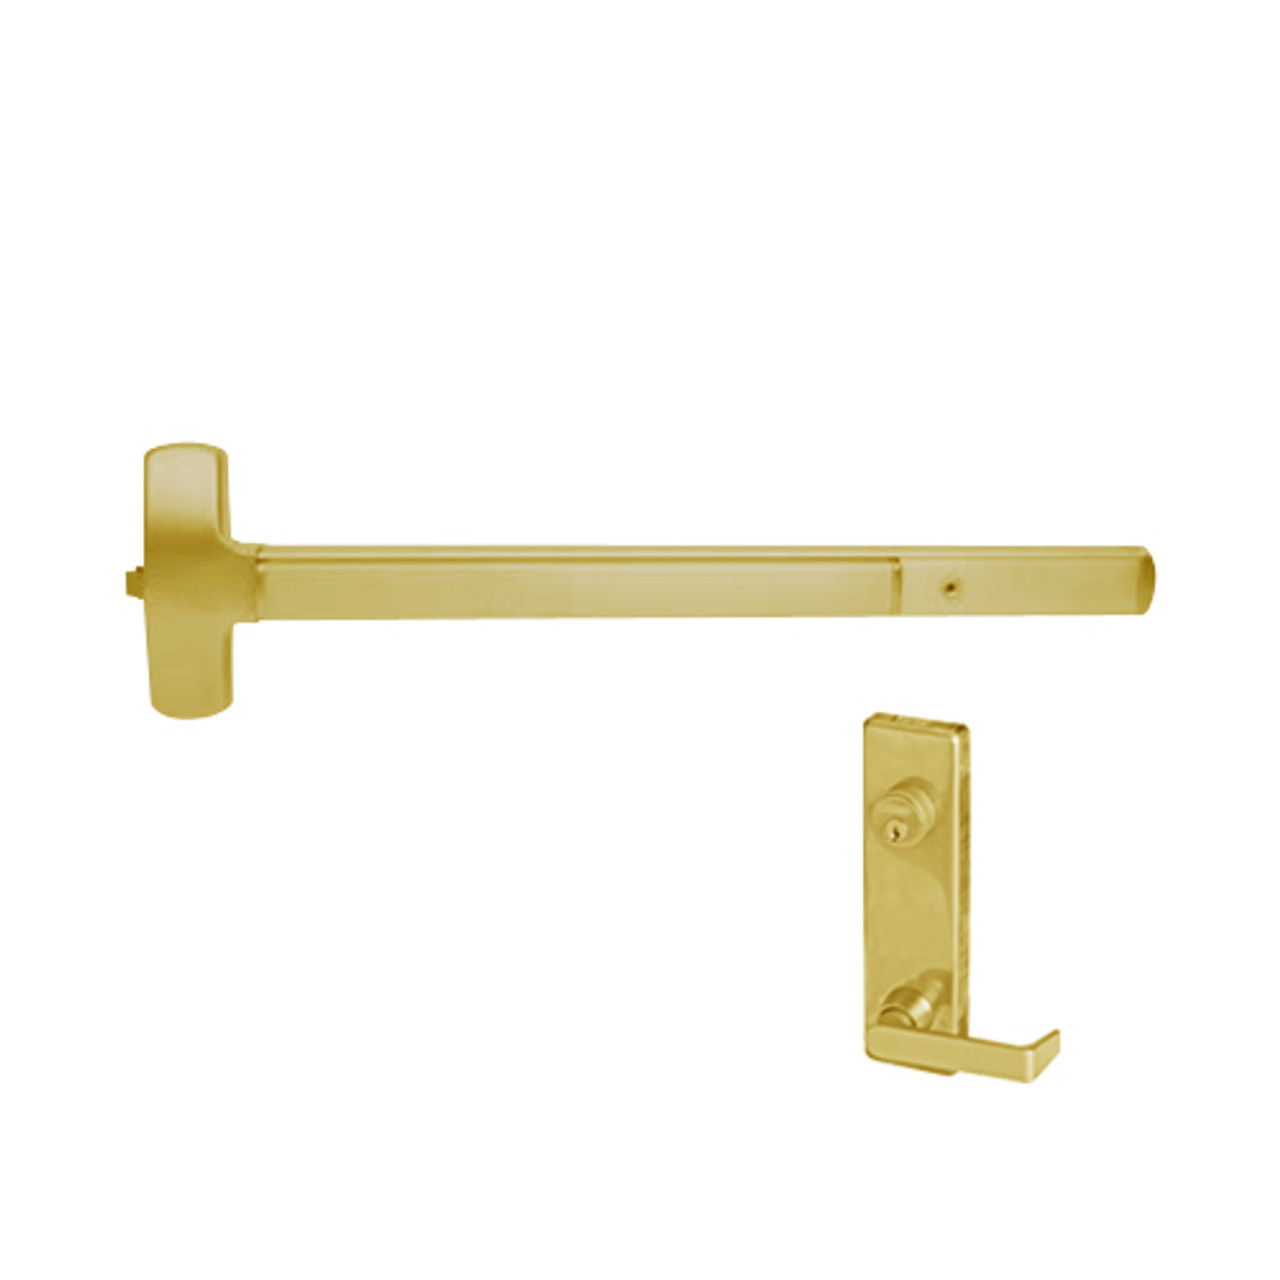 25-R-L-NL-DANE-US3-3-LHR Falcon Exit Device in Polished Brass